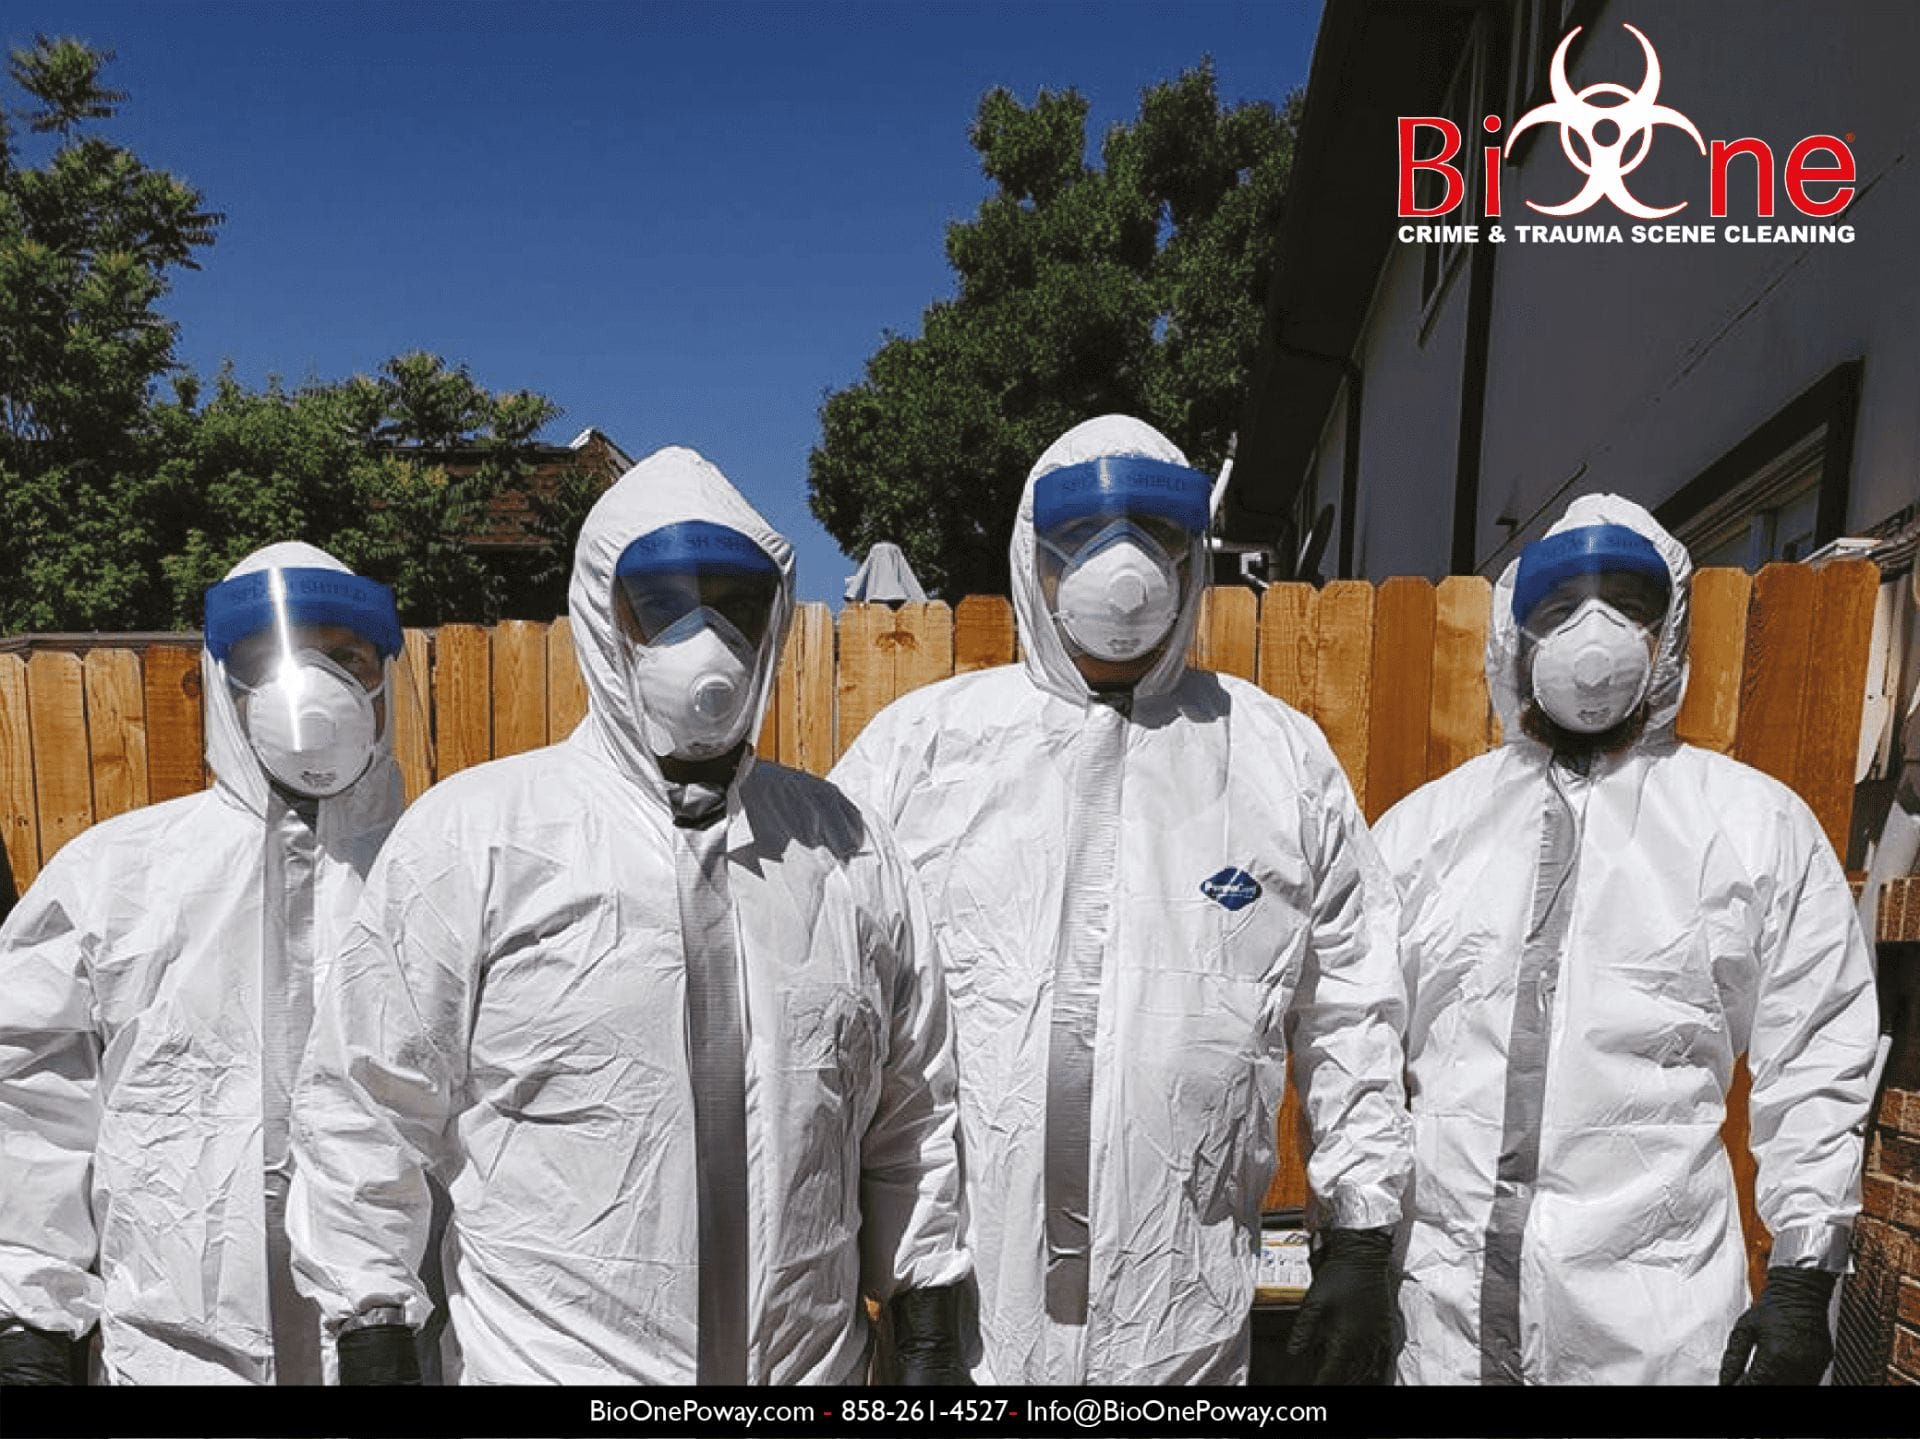 Image shows Bio-One technicians dressed in hazmat and PPE.